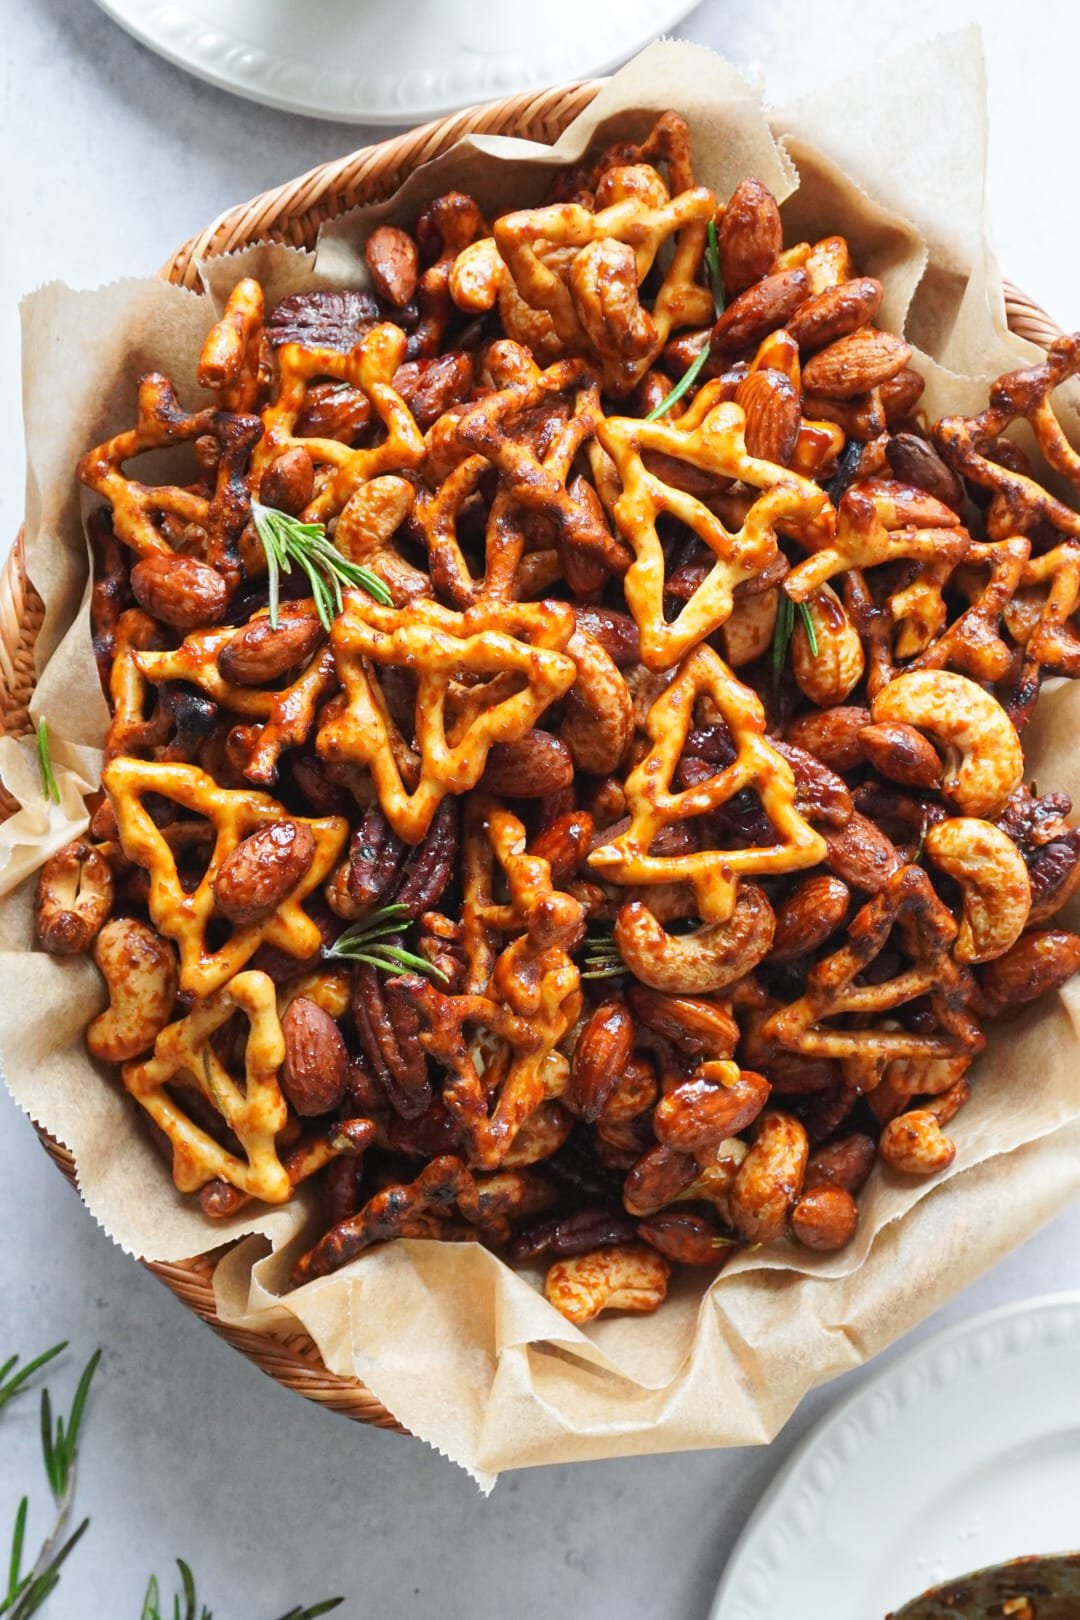 The perfect Sweet and Savoury Spiced Nuts And Pretzels recipe.